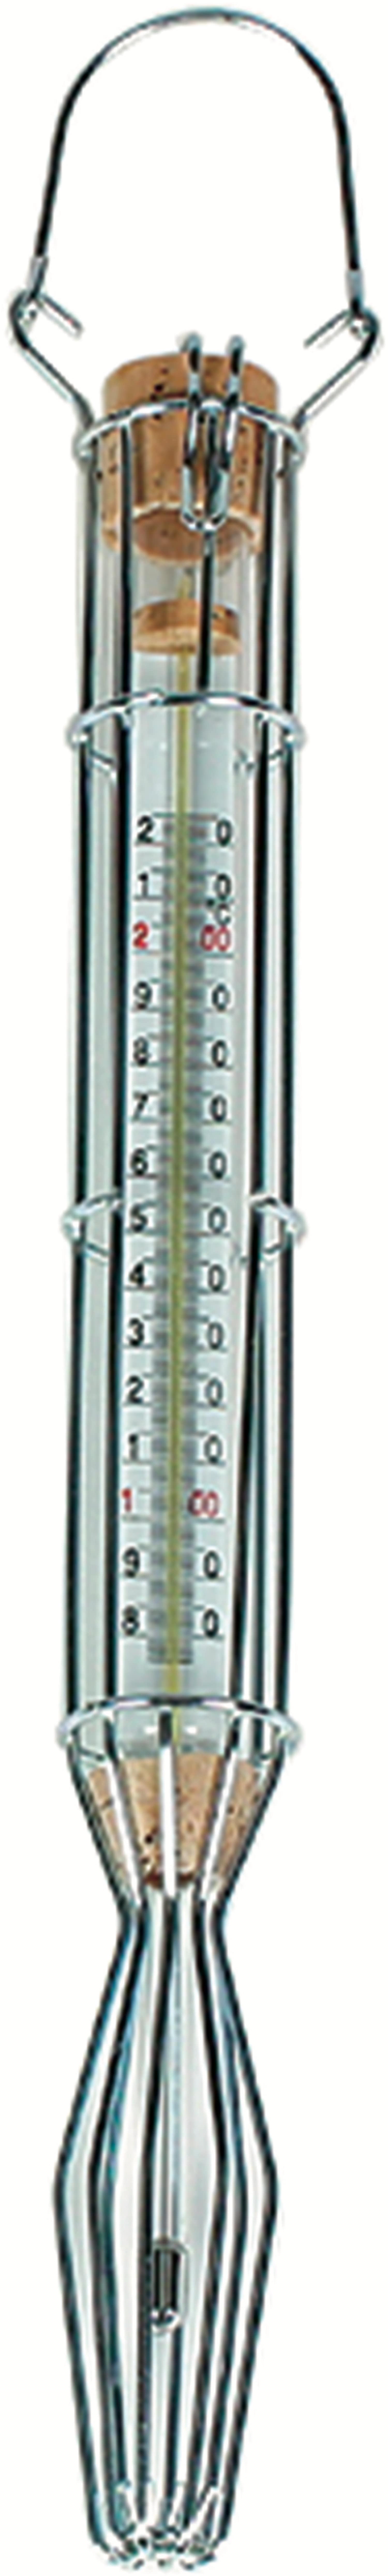 Thermometers 160001 160001